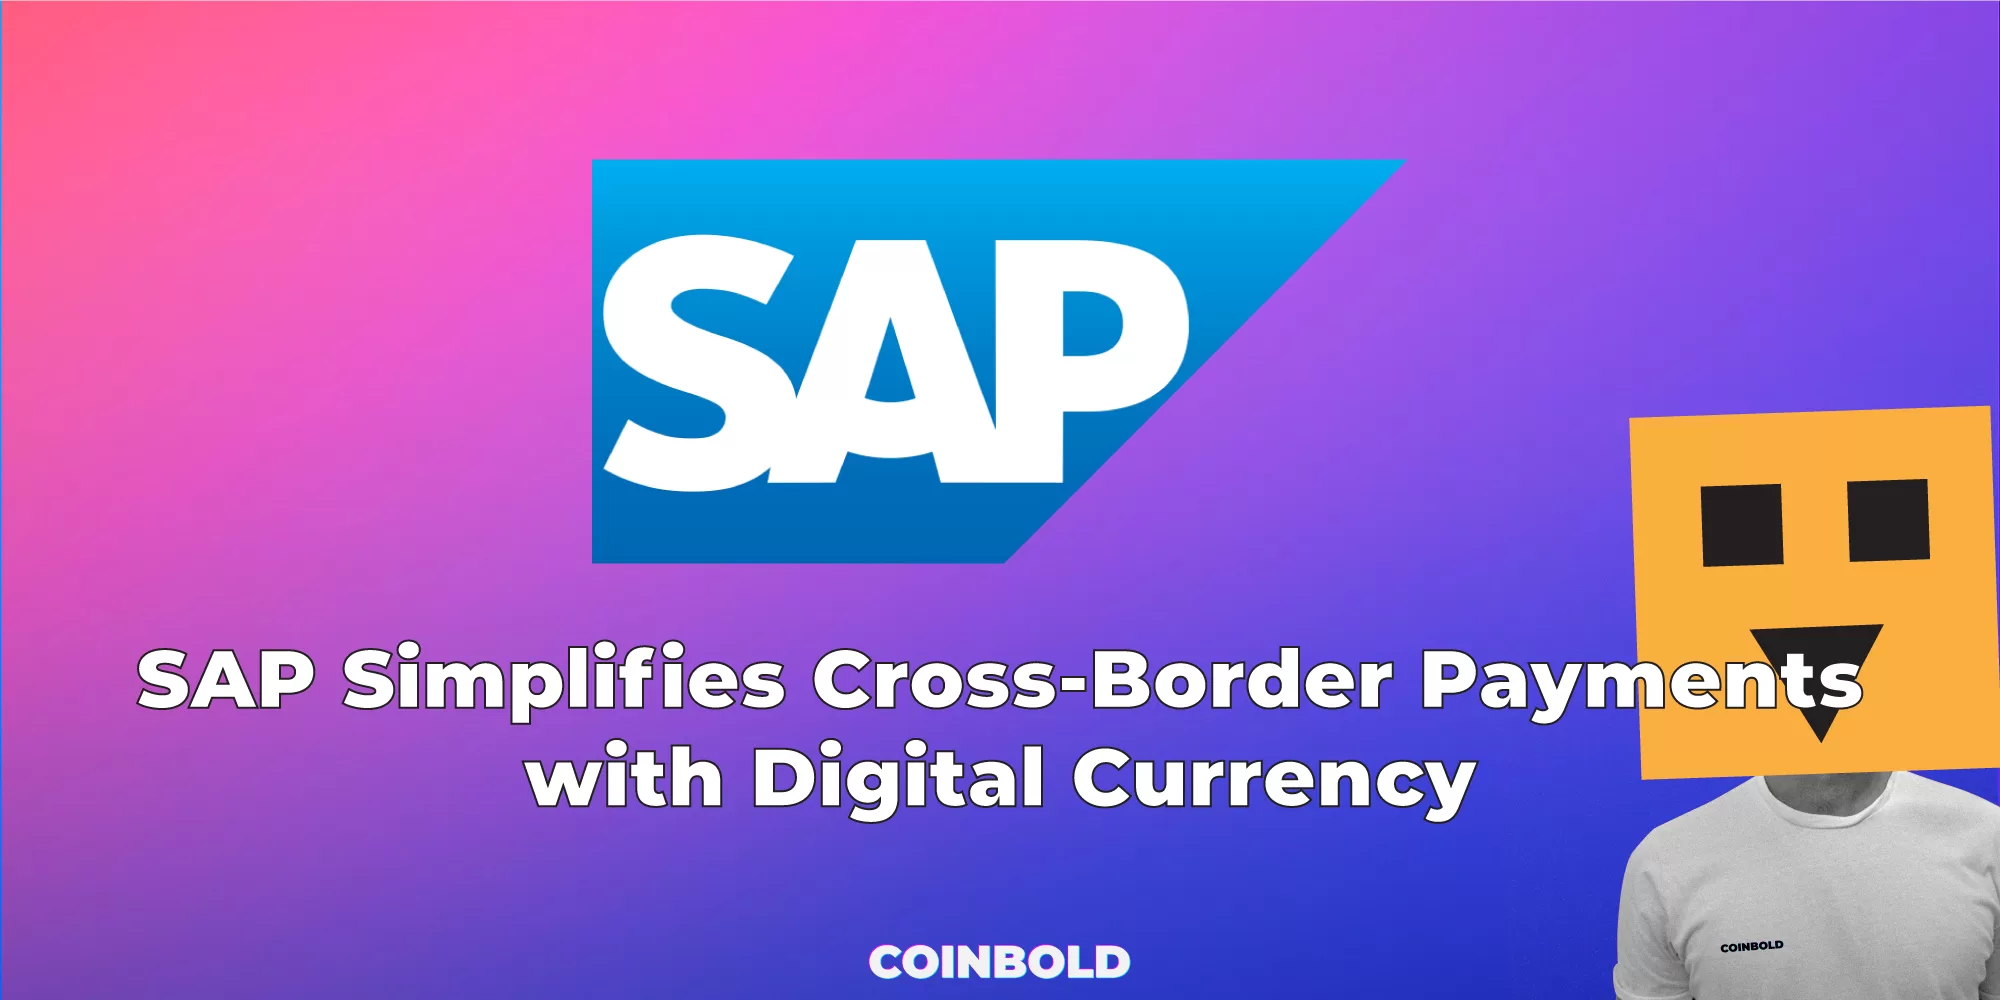 SAP Simplifies Cross-Border Payments with Digital Currency